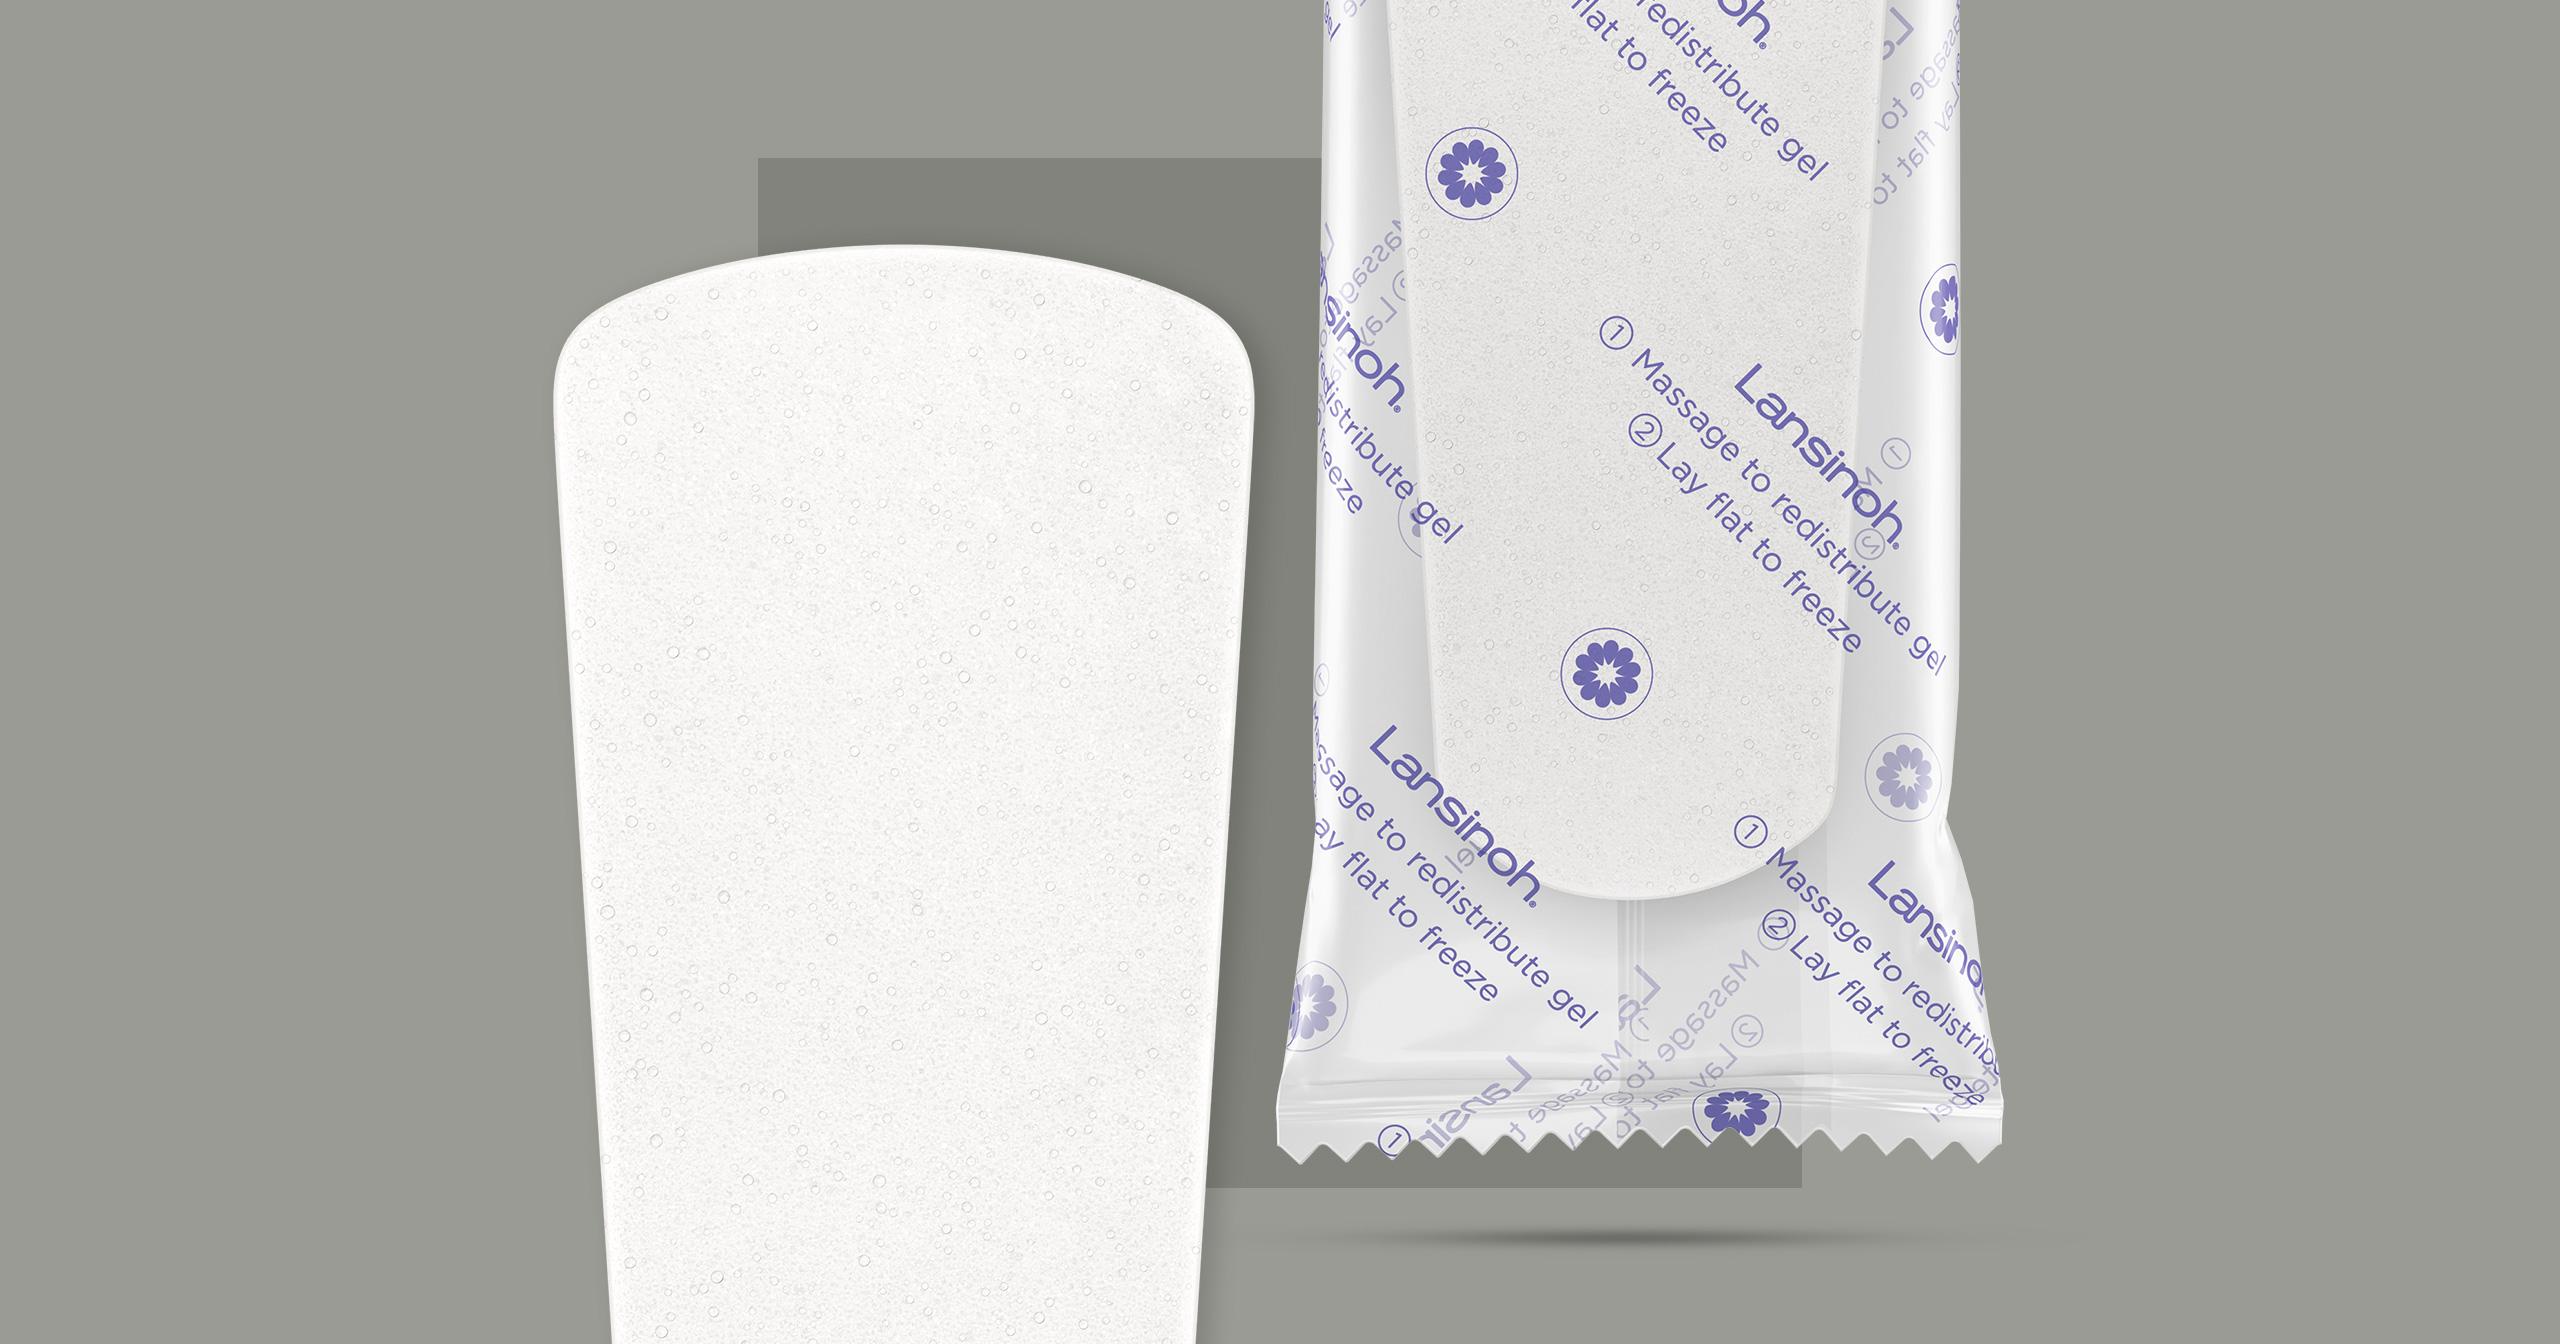 Lansinoh maternity pads in packaging visualised in 3D with creative retouching and postproduction